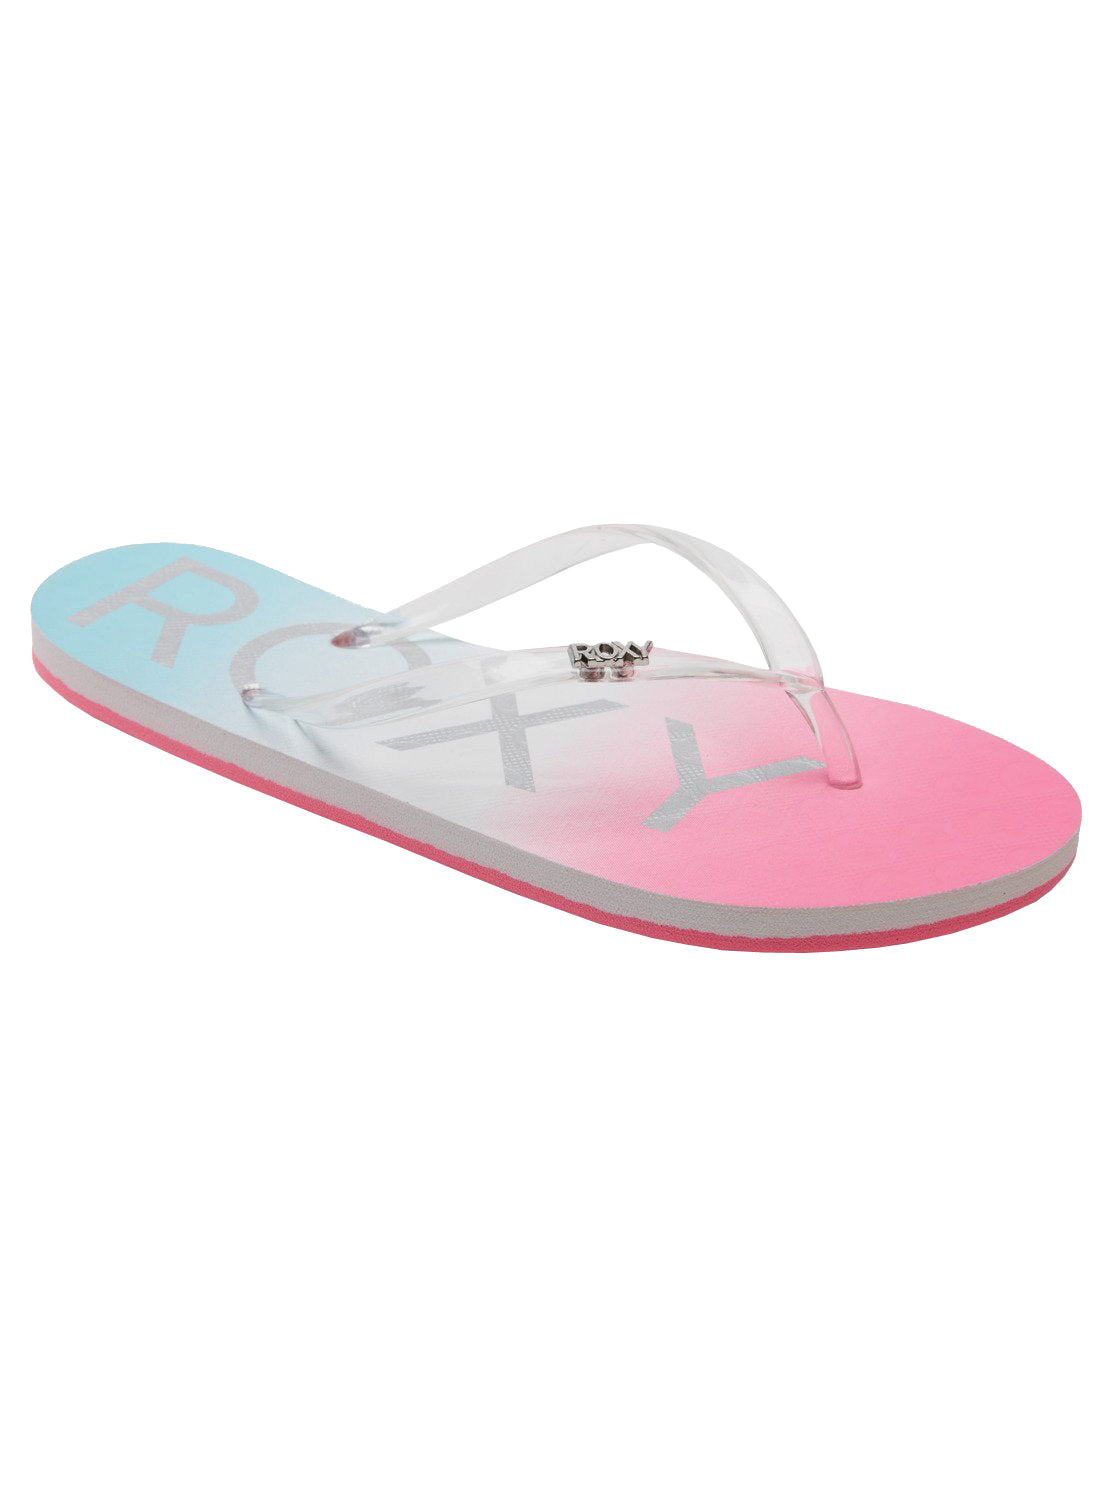 Roxy Viva Jelly Womens Sandal WCQ-White-Crazy Pink-Turquoise 8